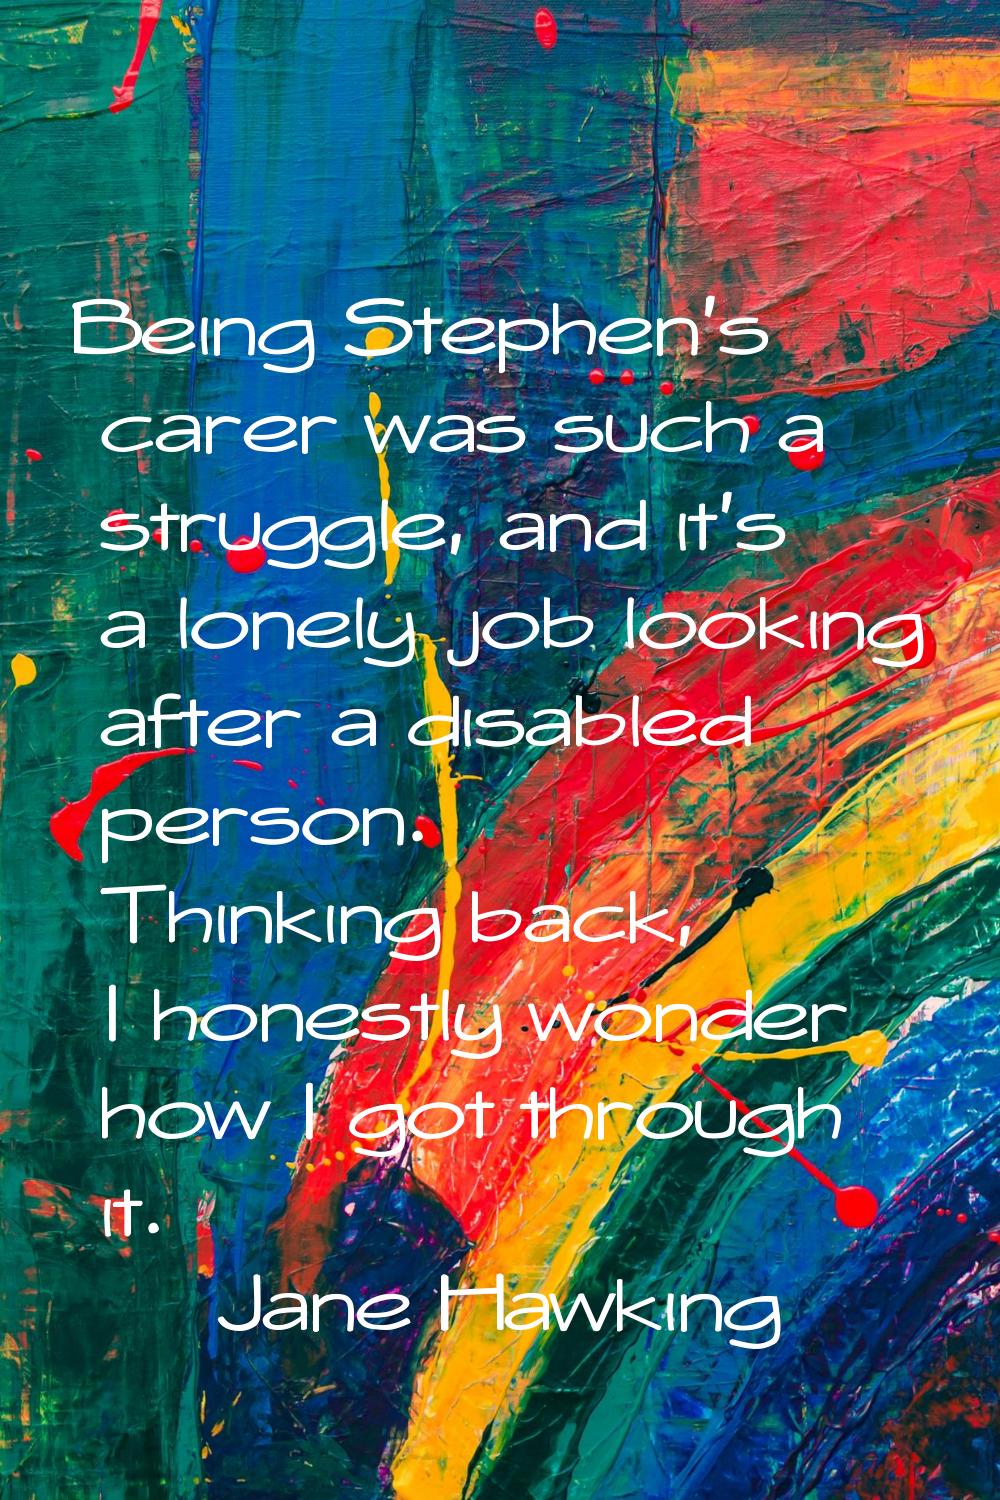 Being Stephen's carer was such a struggle, and it's a lonely job looking after a disabled person. T